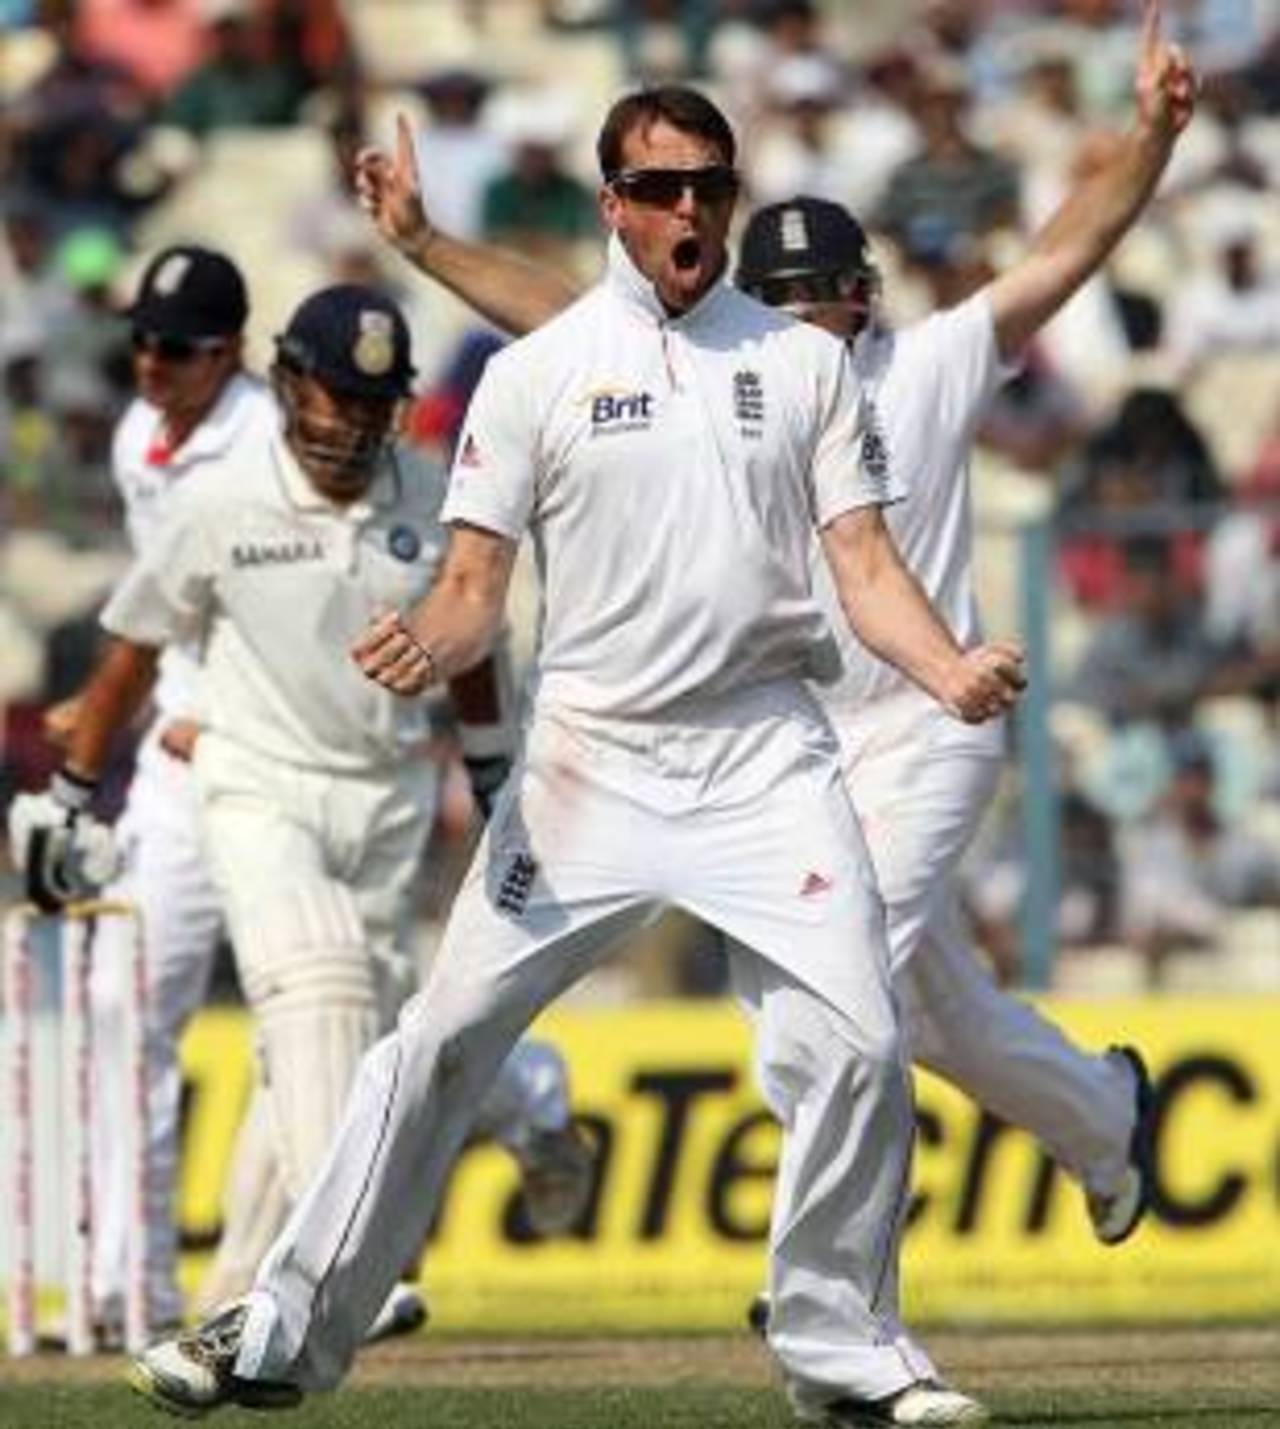 Graeme Swann has a Test average of less than 32 in every country he has played in, except Australia&nbsp;&nbsp;&bull;&nbsp;&nbsp;BCCI